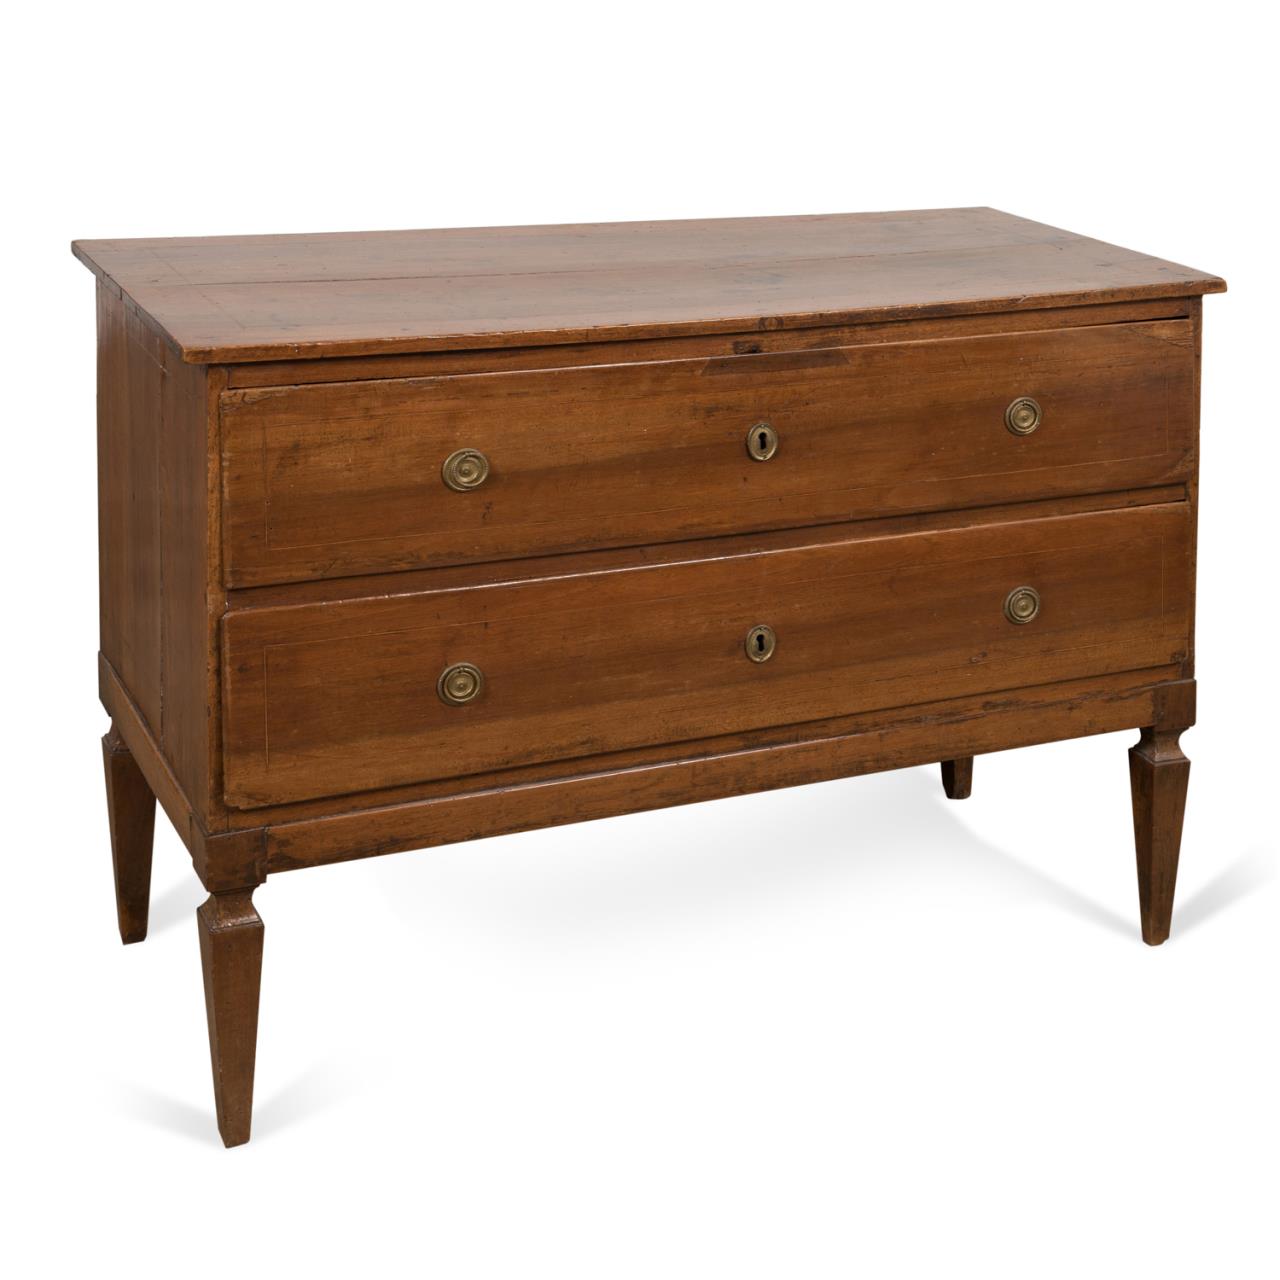 NEOCLASSICAL STYLE TWO DRAWER CHEST